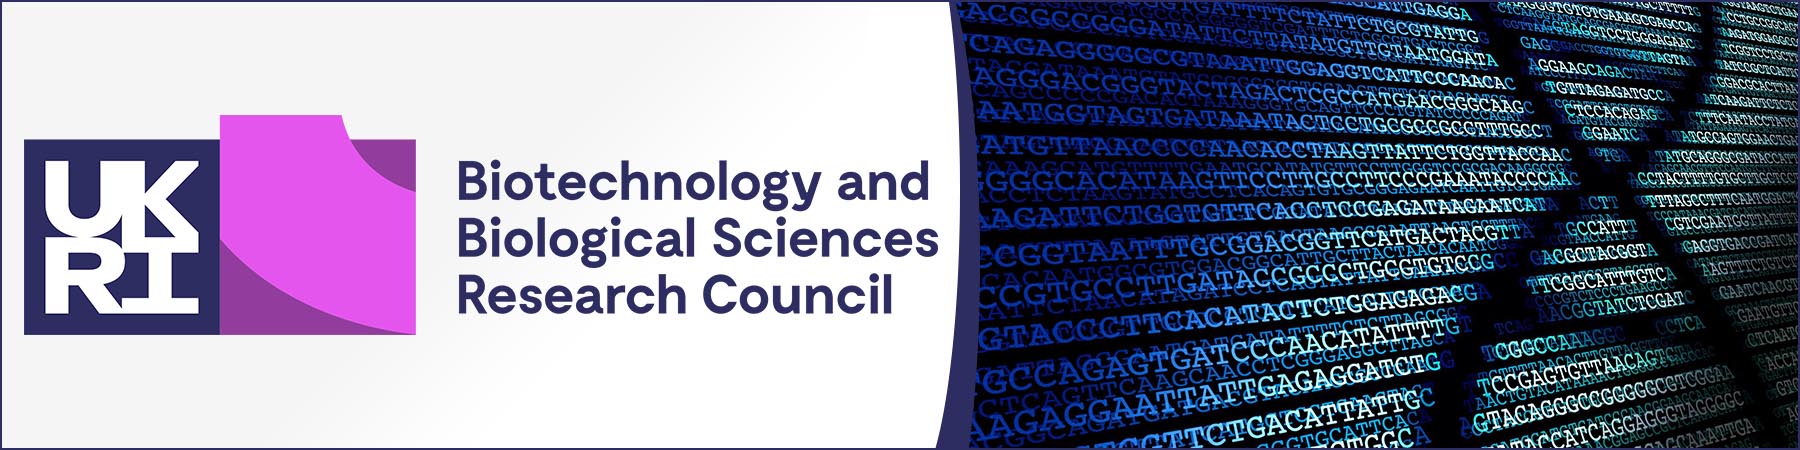 BBSRC - Biotechnology and Biological Sciences Research Council